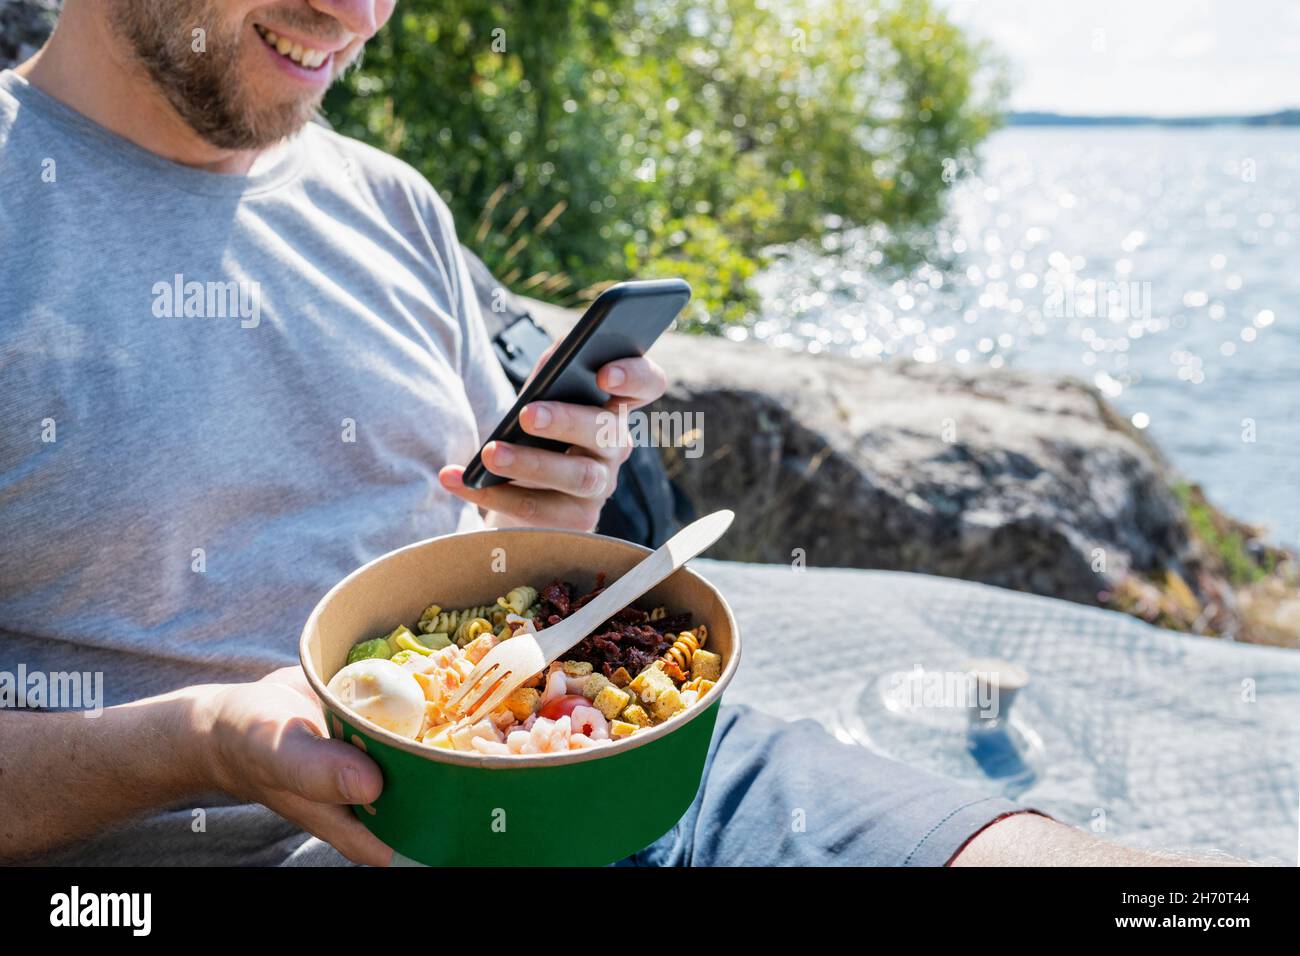 Man holding bowl with food and using phone Stock Photo